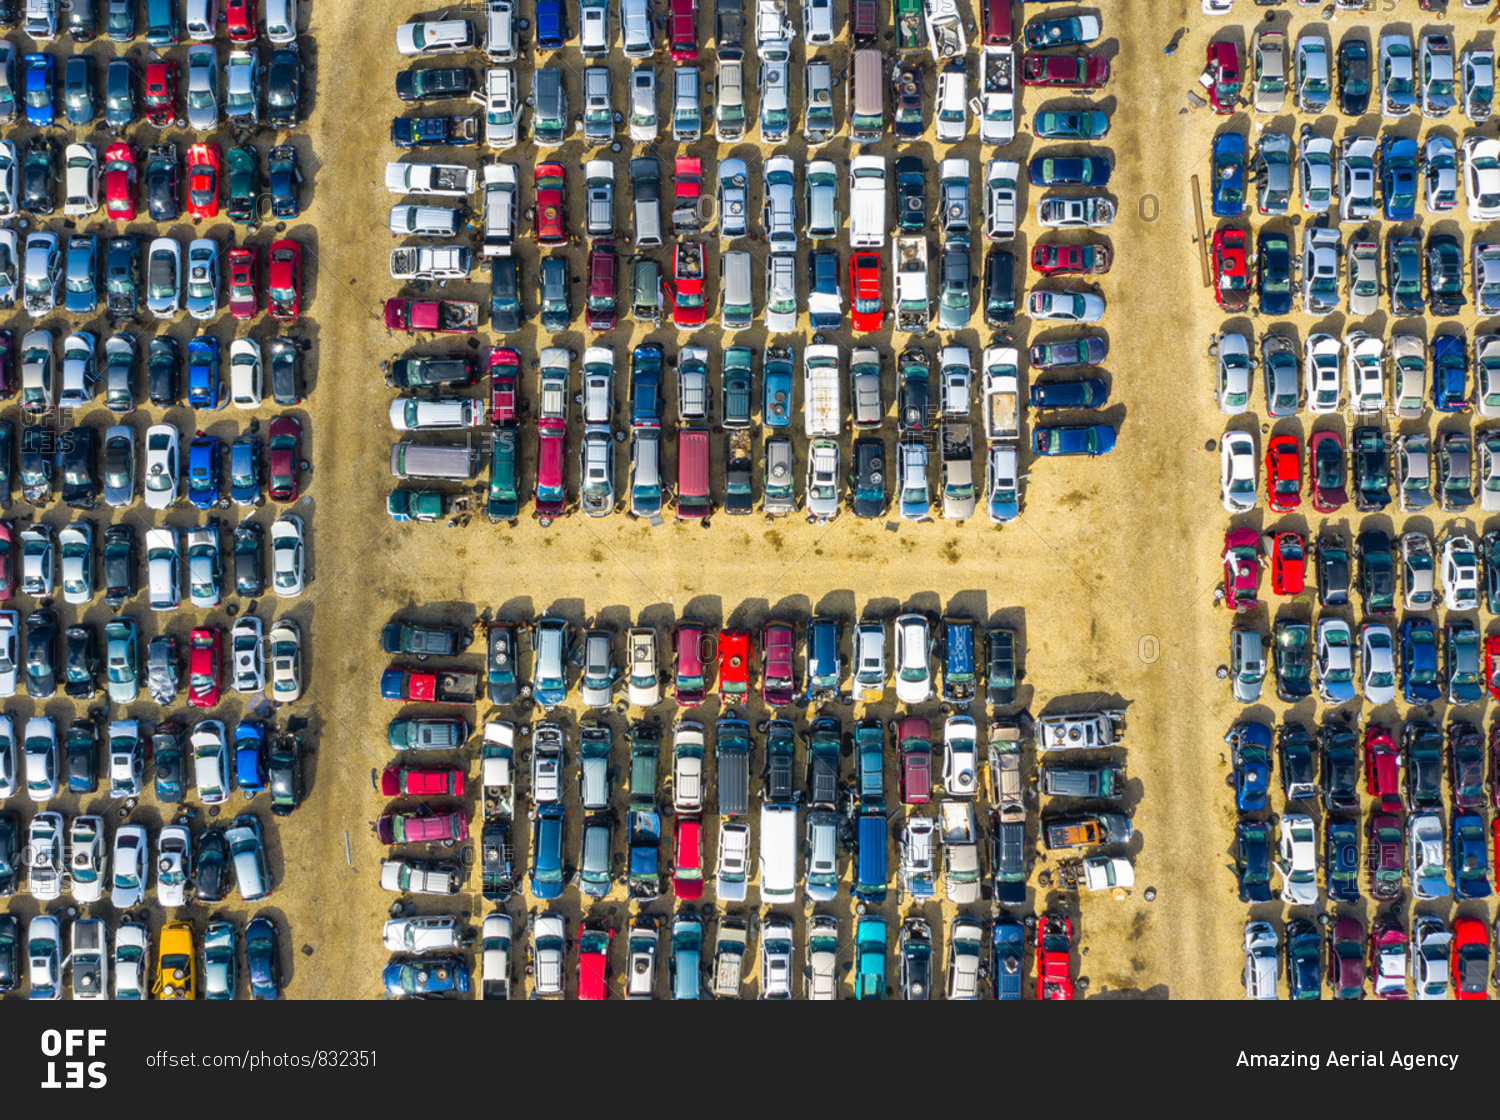 Aerial view of rows of old cars that have served, assembled in a junk yard waiting to be recycled for their reusable parts, Aurora, IL, USA.